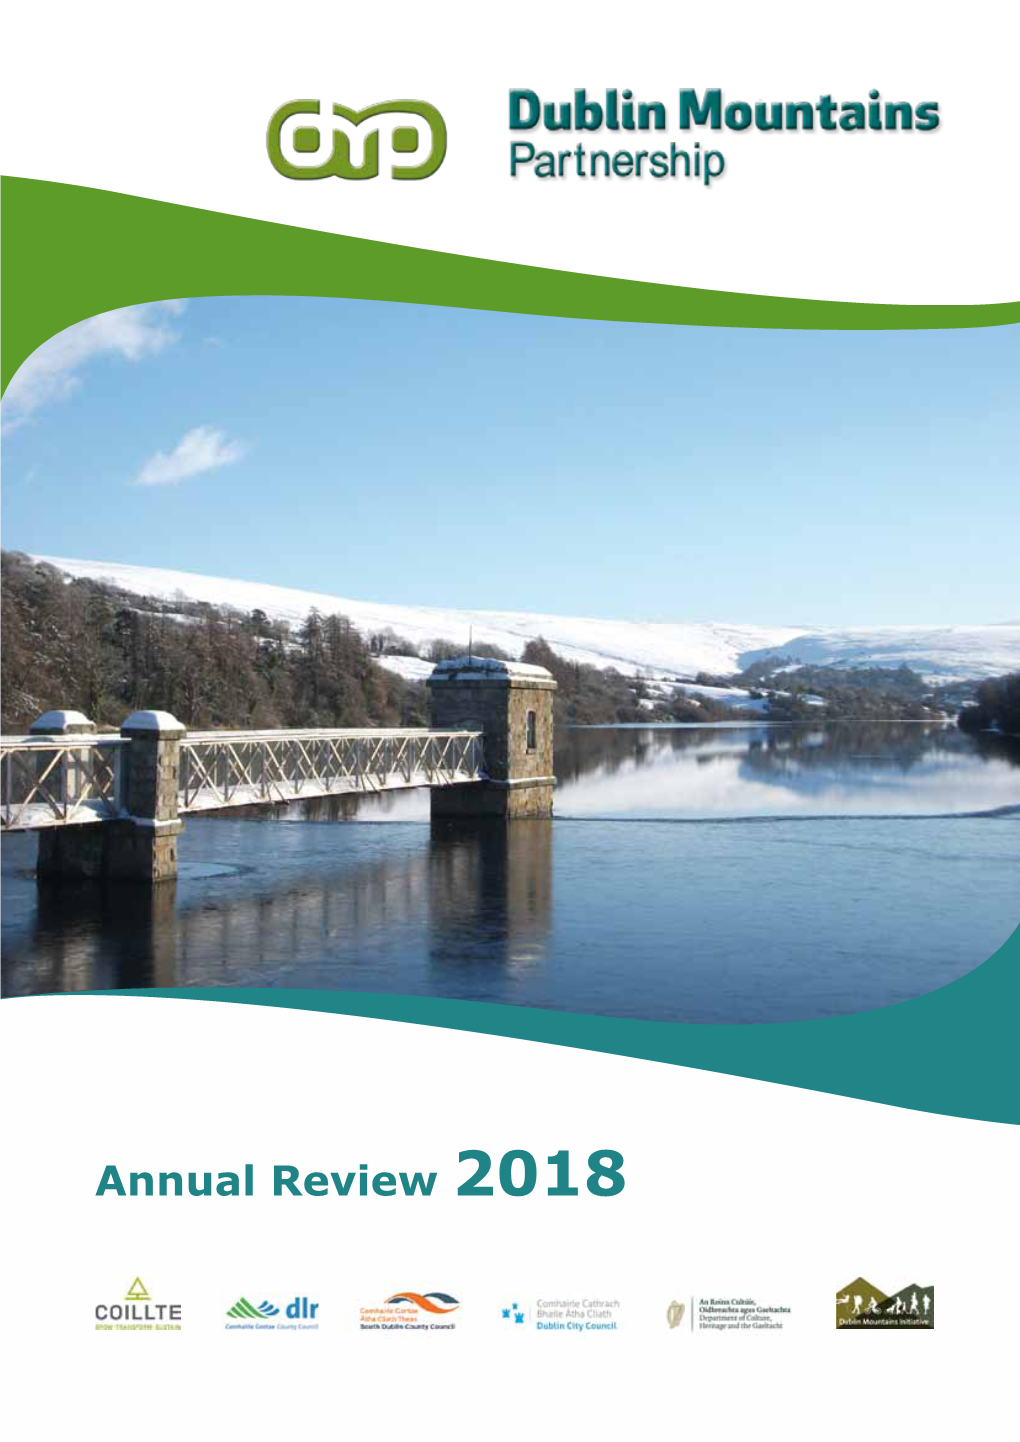 Annual Review 2018 Dublin Mountains Partnership Vision Is